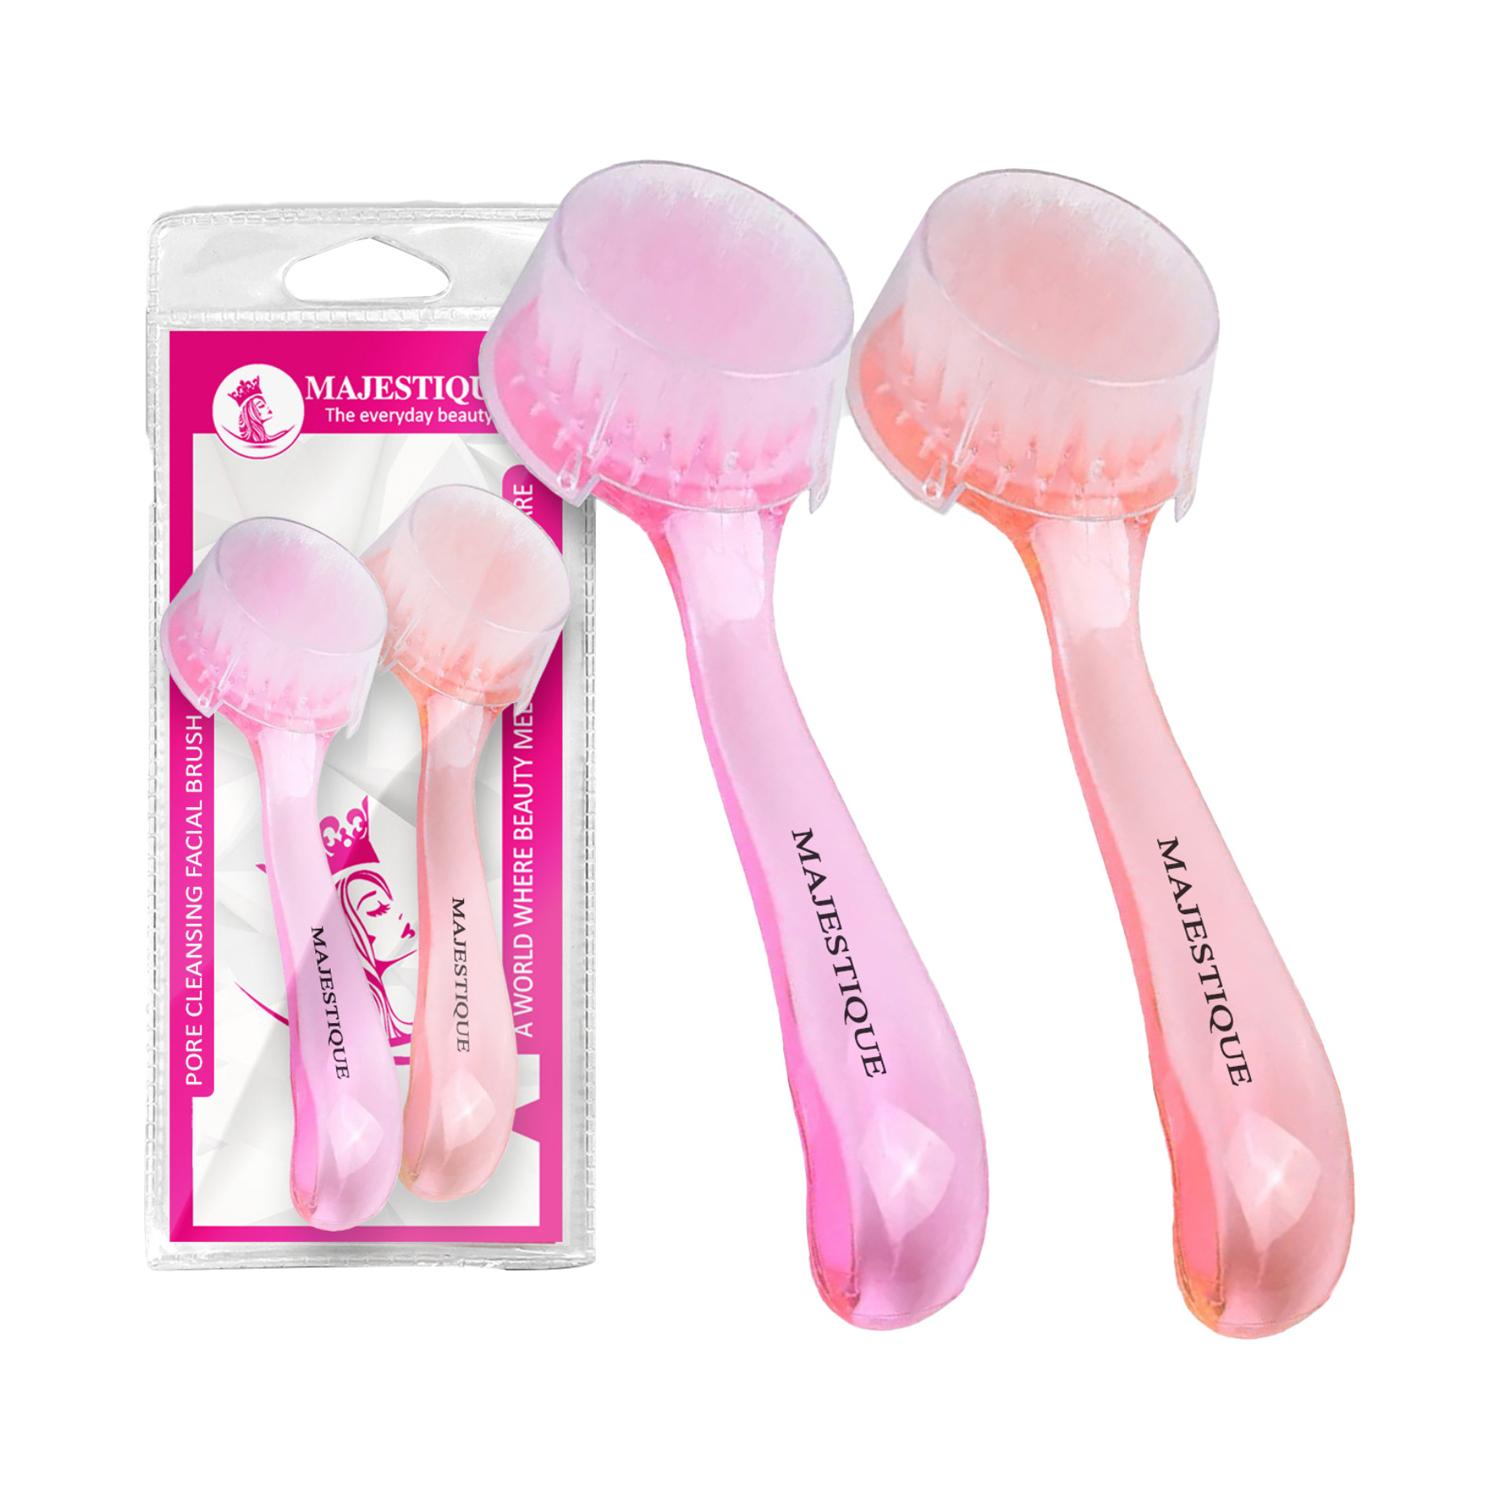 Majestique | Majestique Pore Cleaning Facial Brush Combo Remove Blackheads and Massage Skin Cleansing (2 pcs)